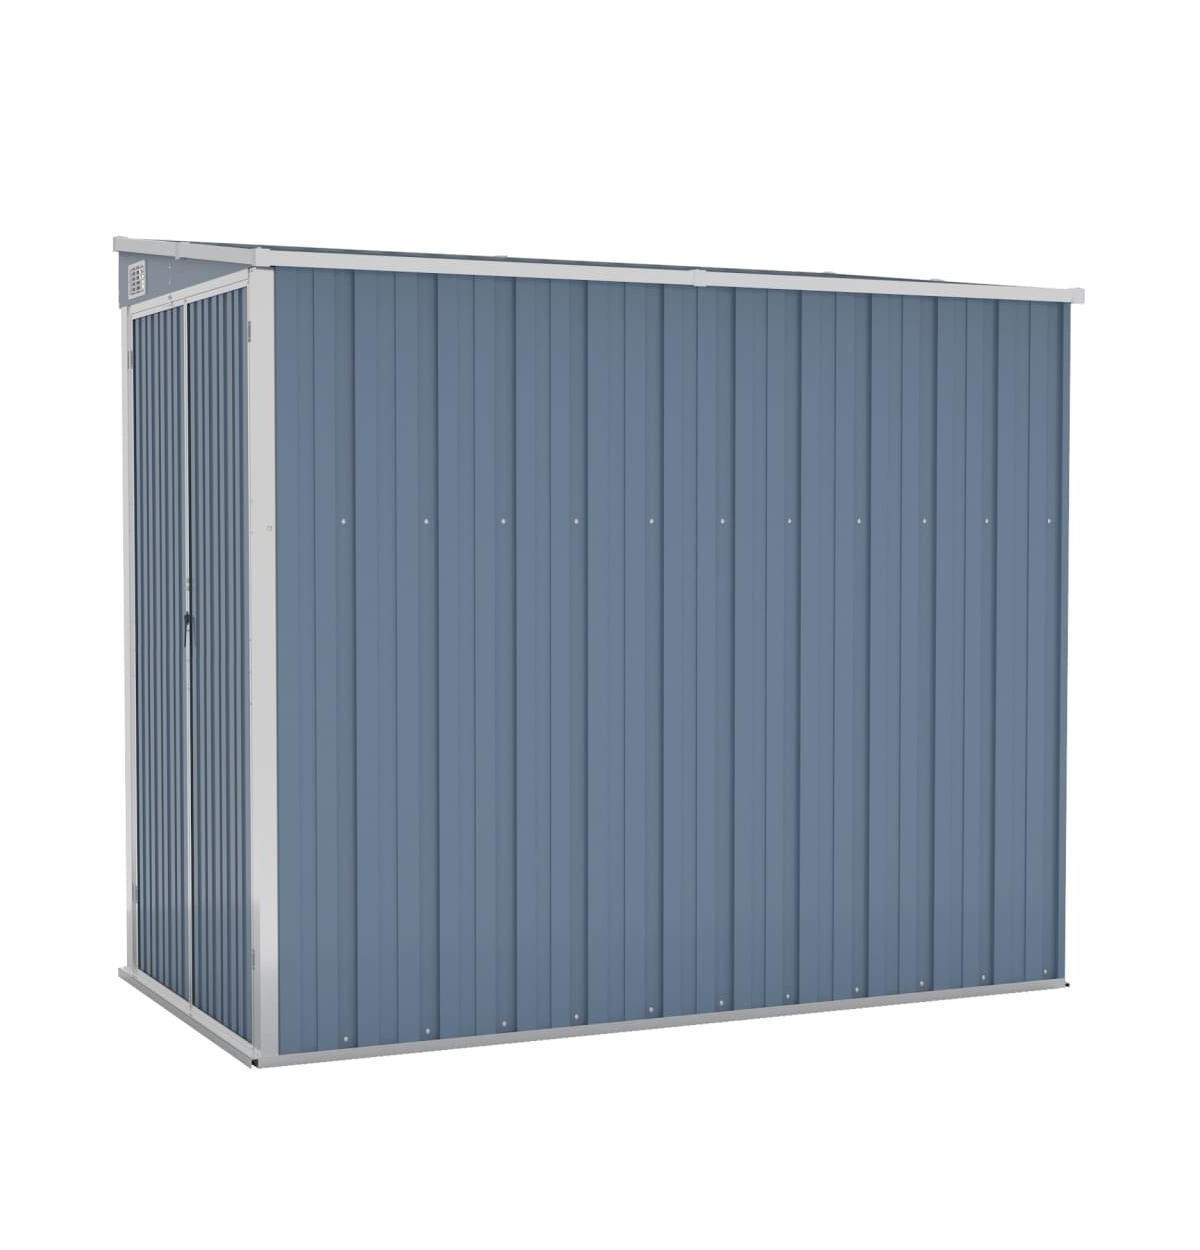 Wall-mounted Garden Shed Gray 46.5"x76.4"x70.1" Galvanized Steel - Grey